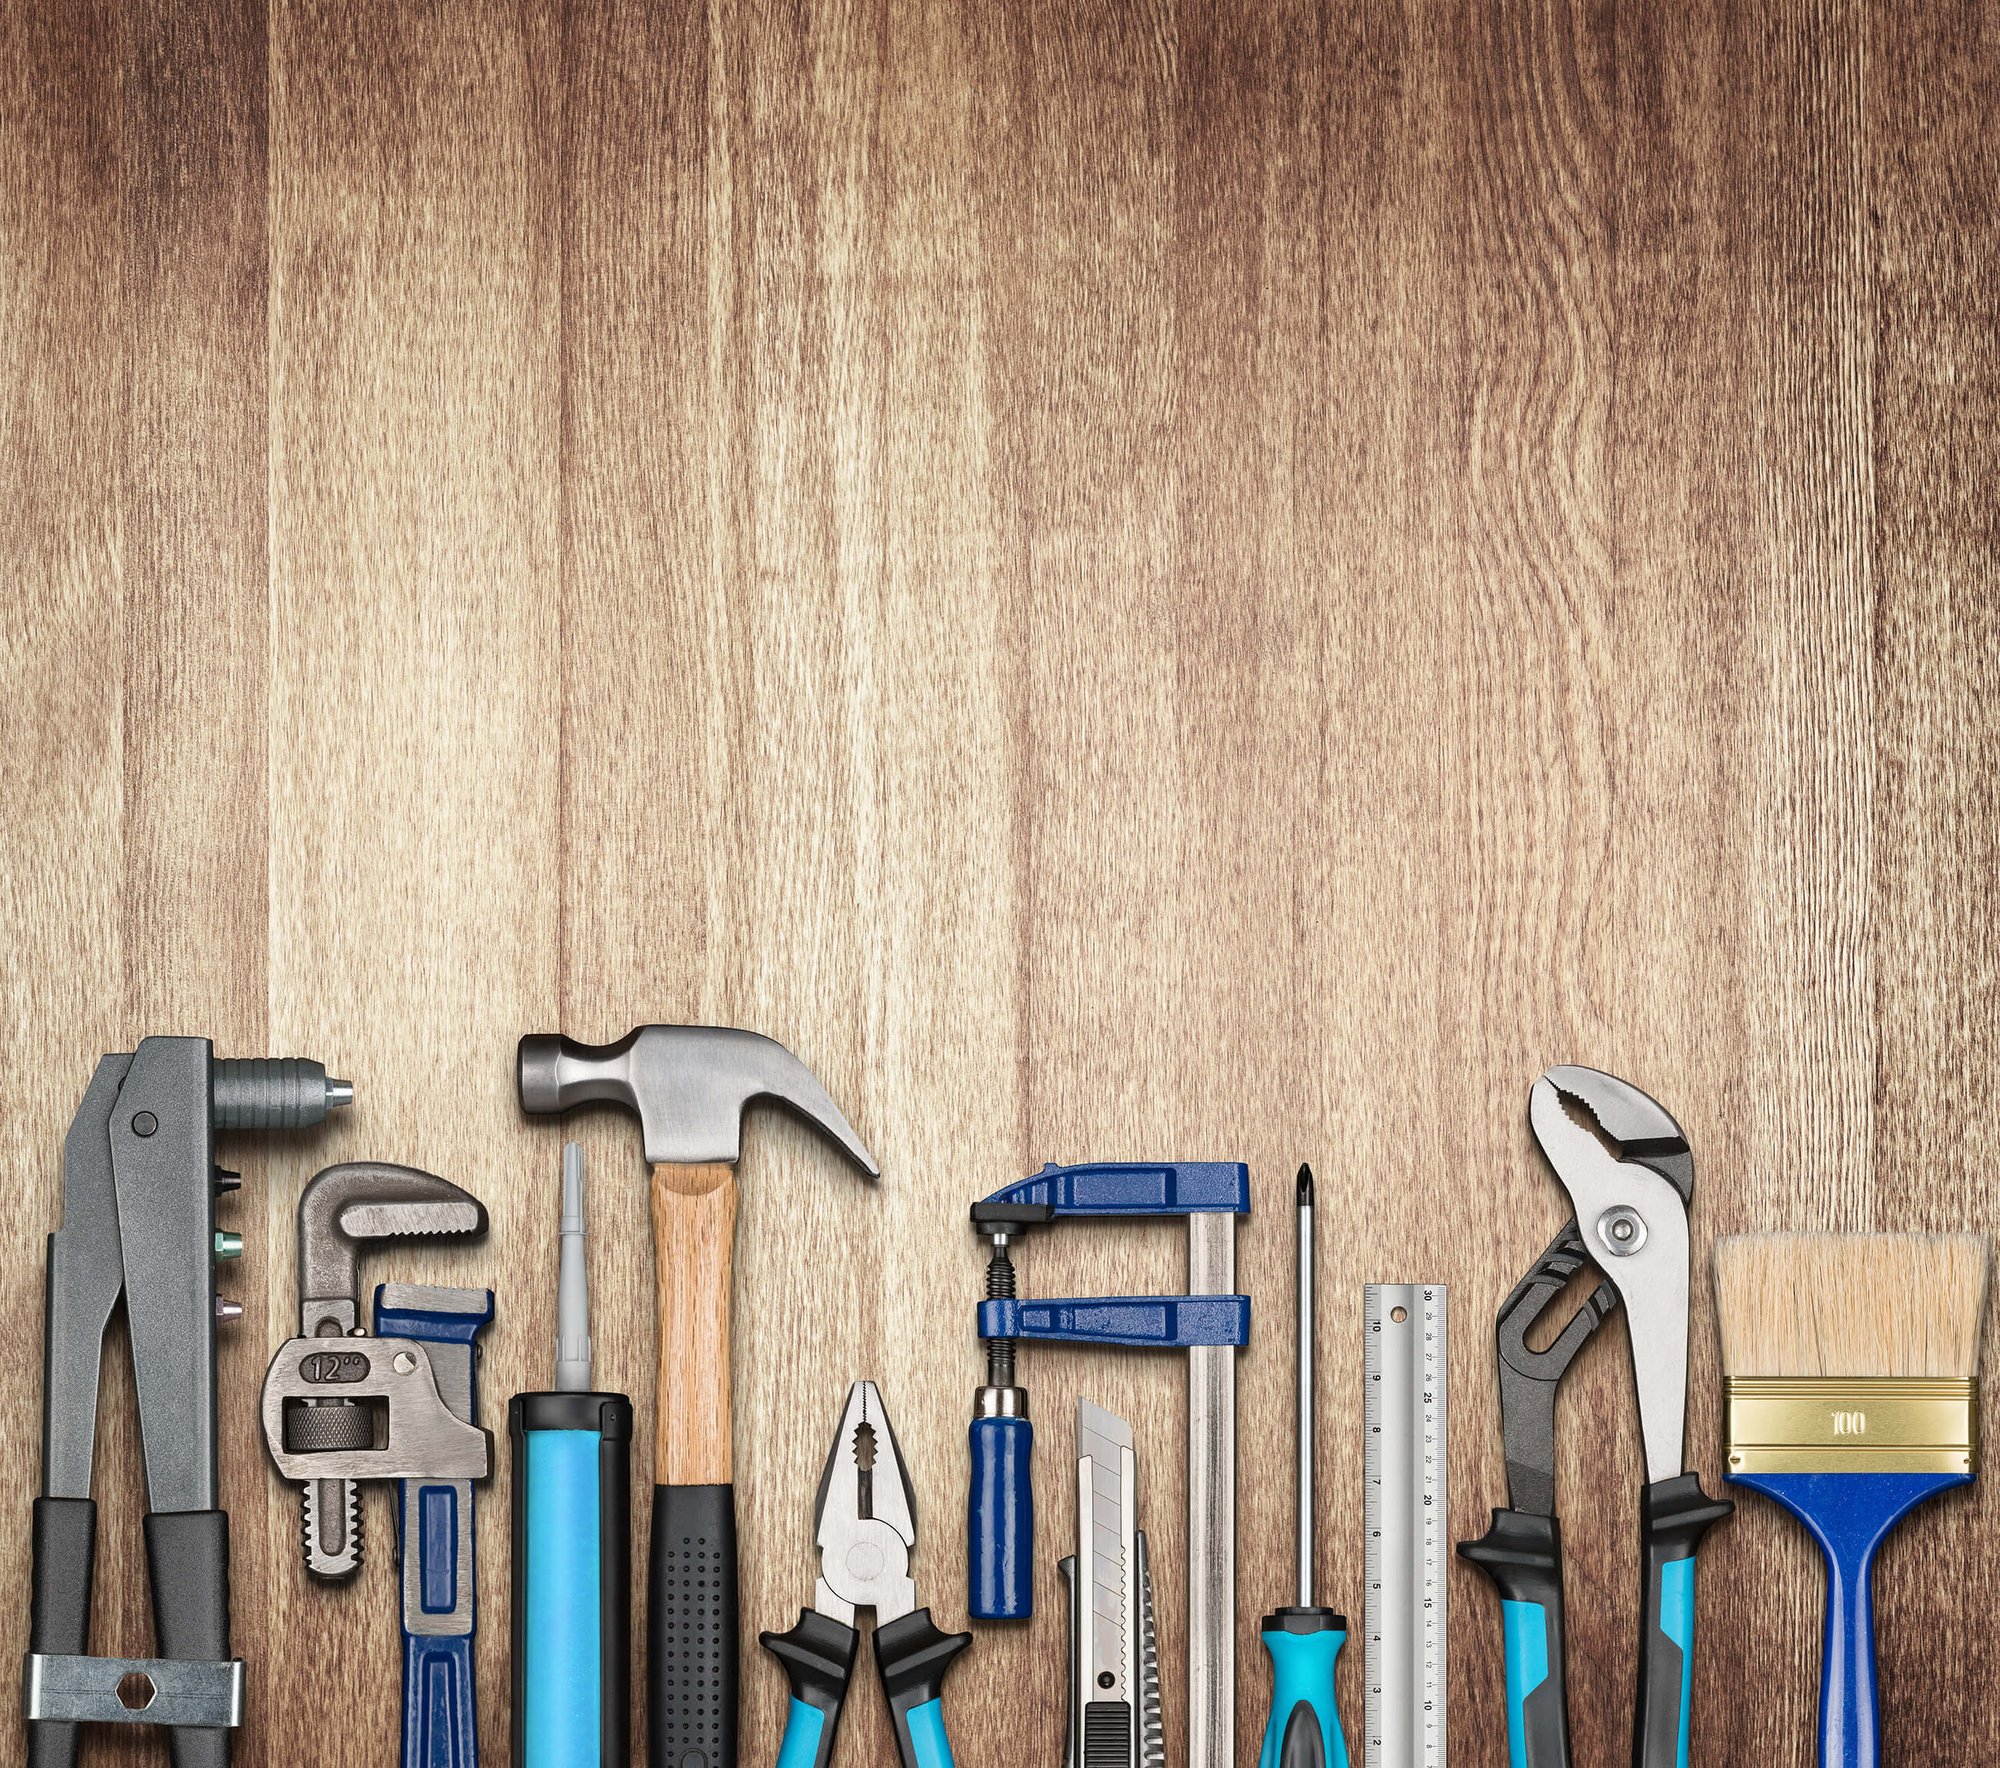 Hammer, vice grip, pliers and other hand tools, showcasing a wide variety of facility services.